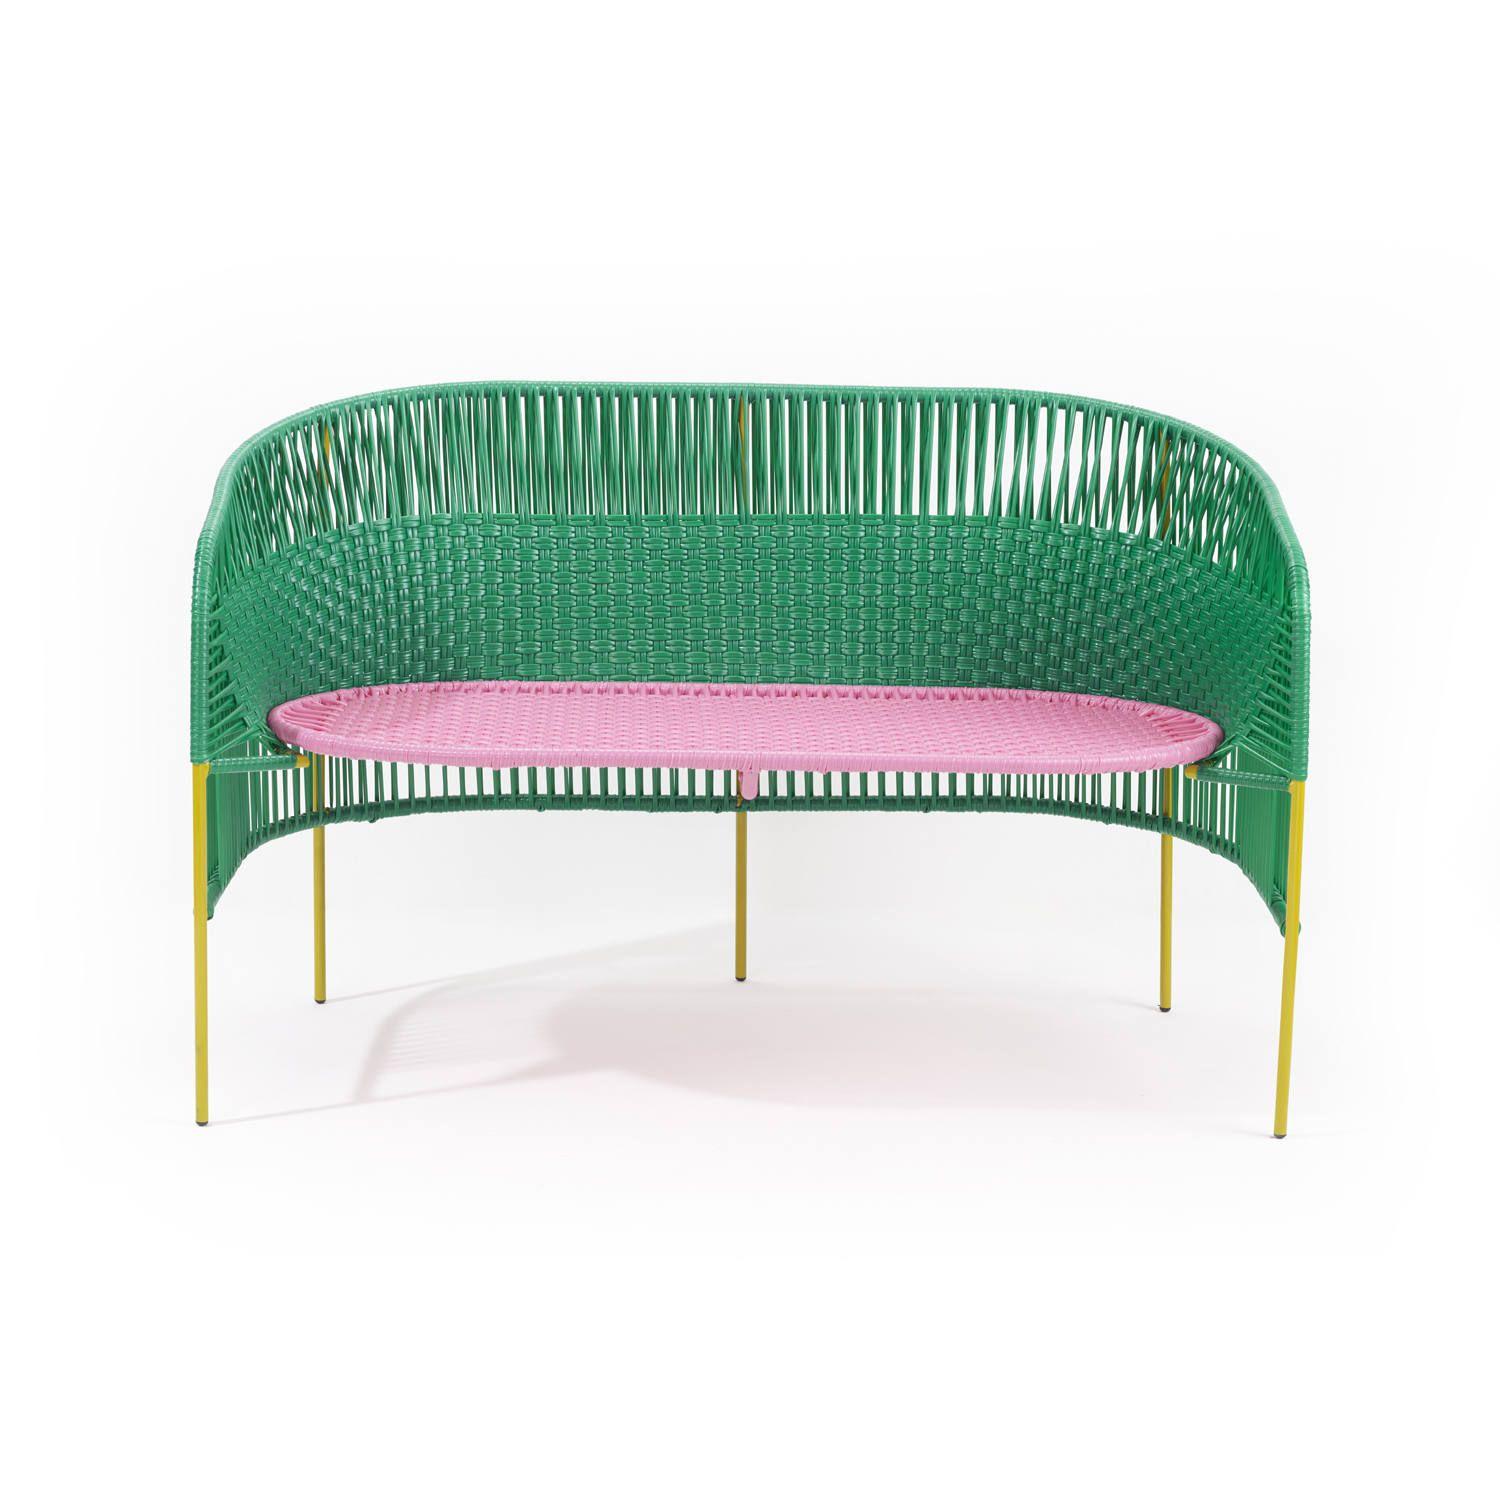 Steel Ames Caribe 2 Seater Outdoor Bench by Sebastian Herkner For Sale